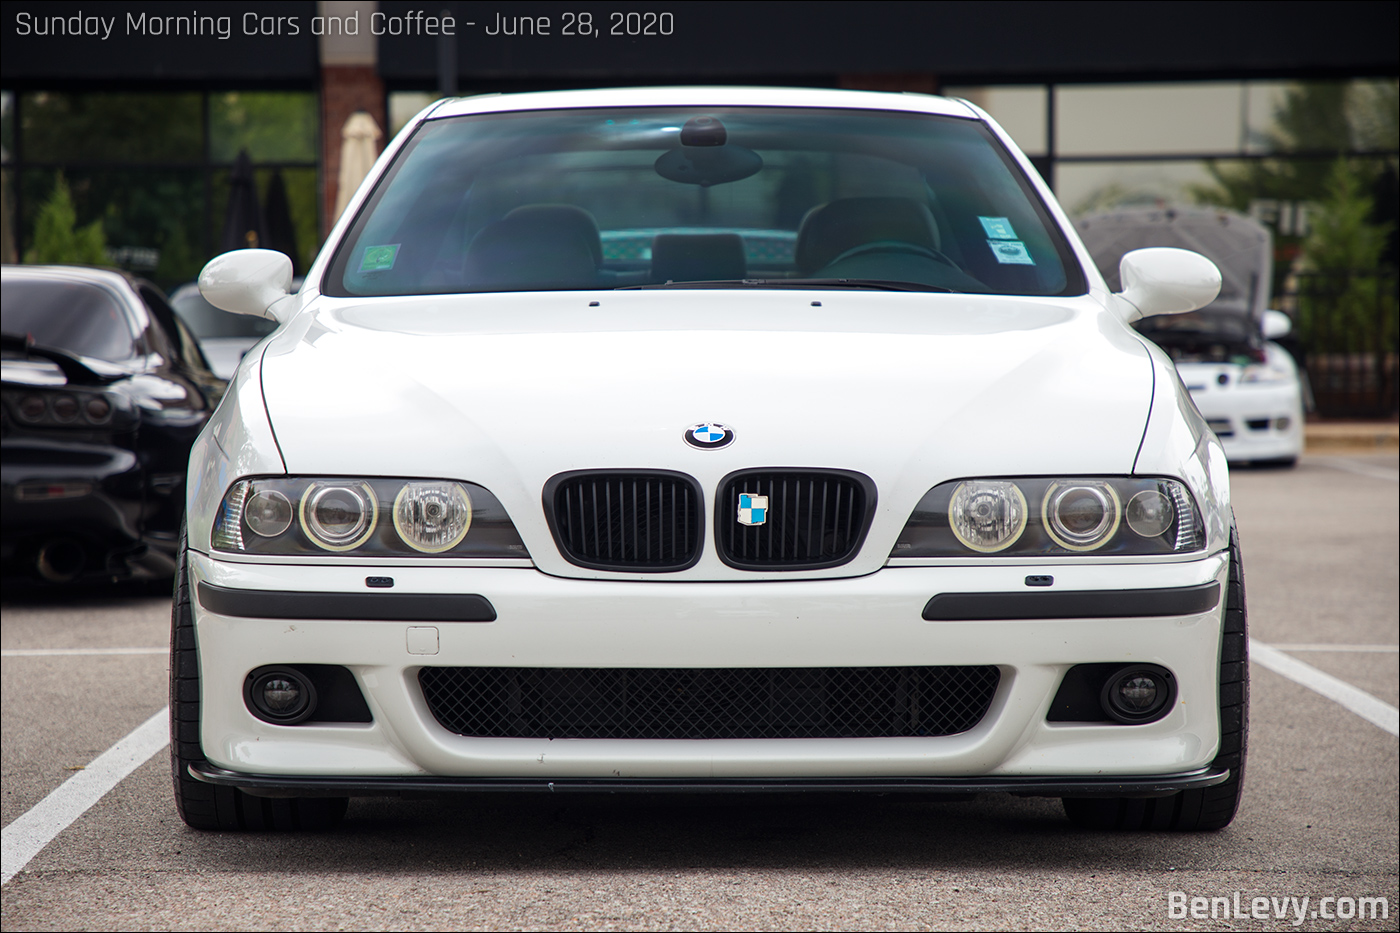 Front of E39 BMW M5